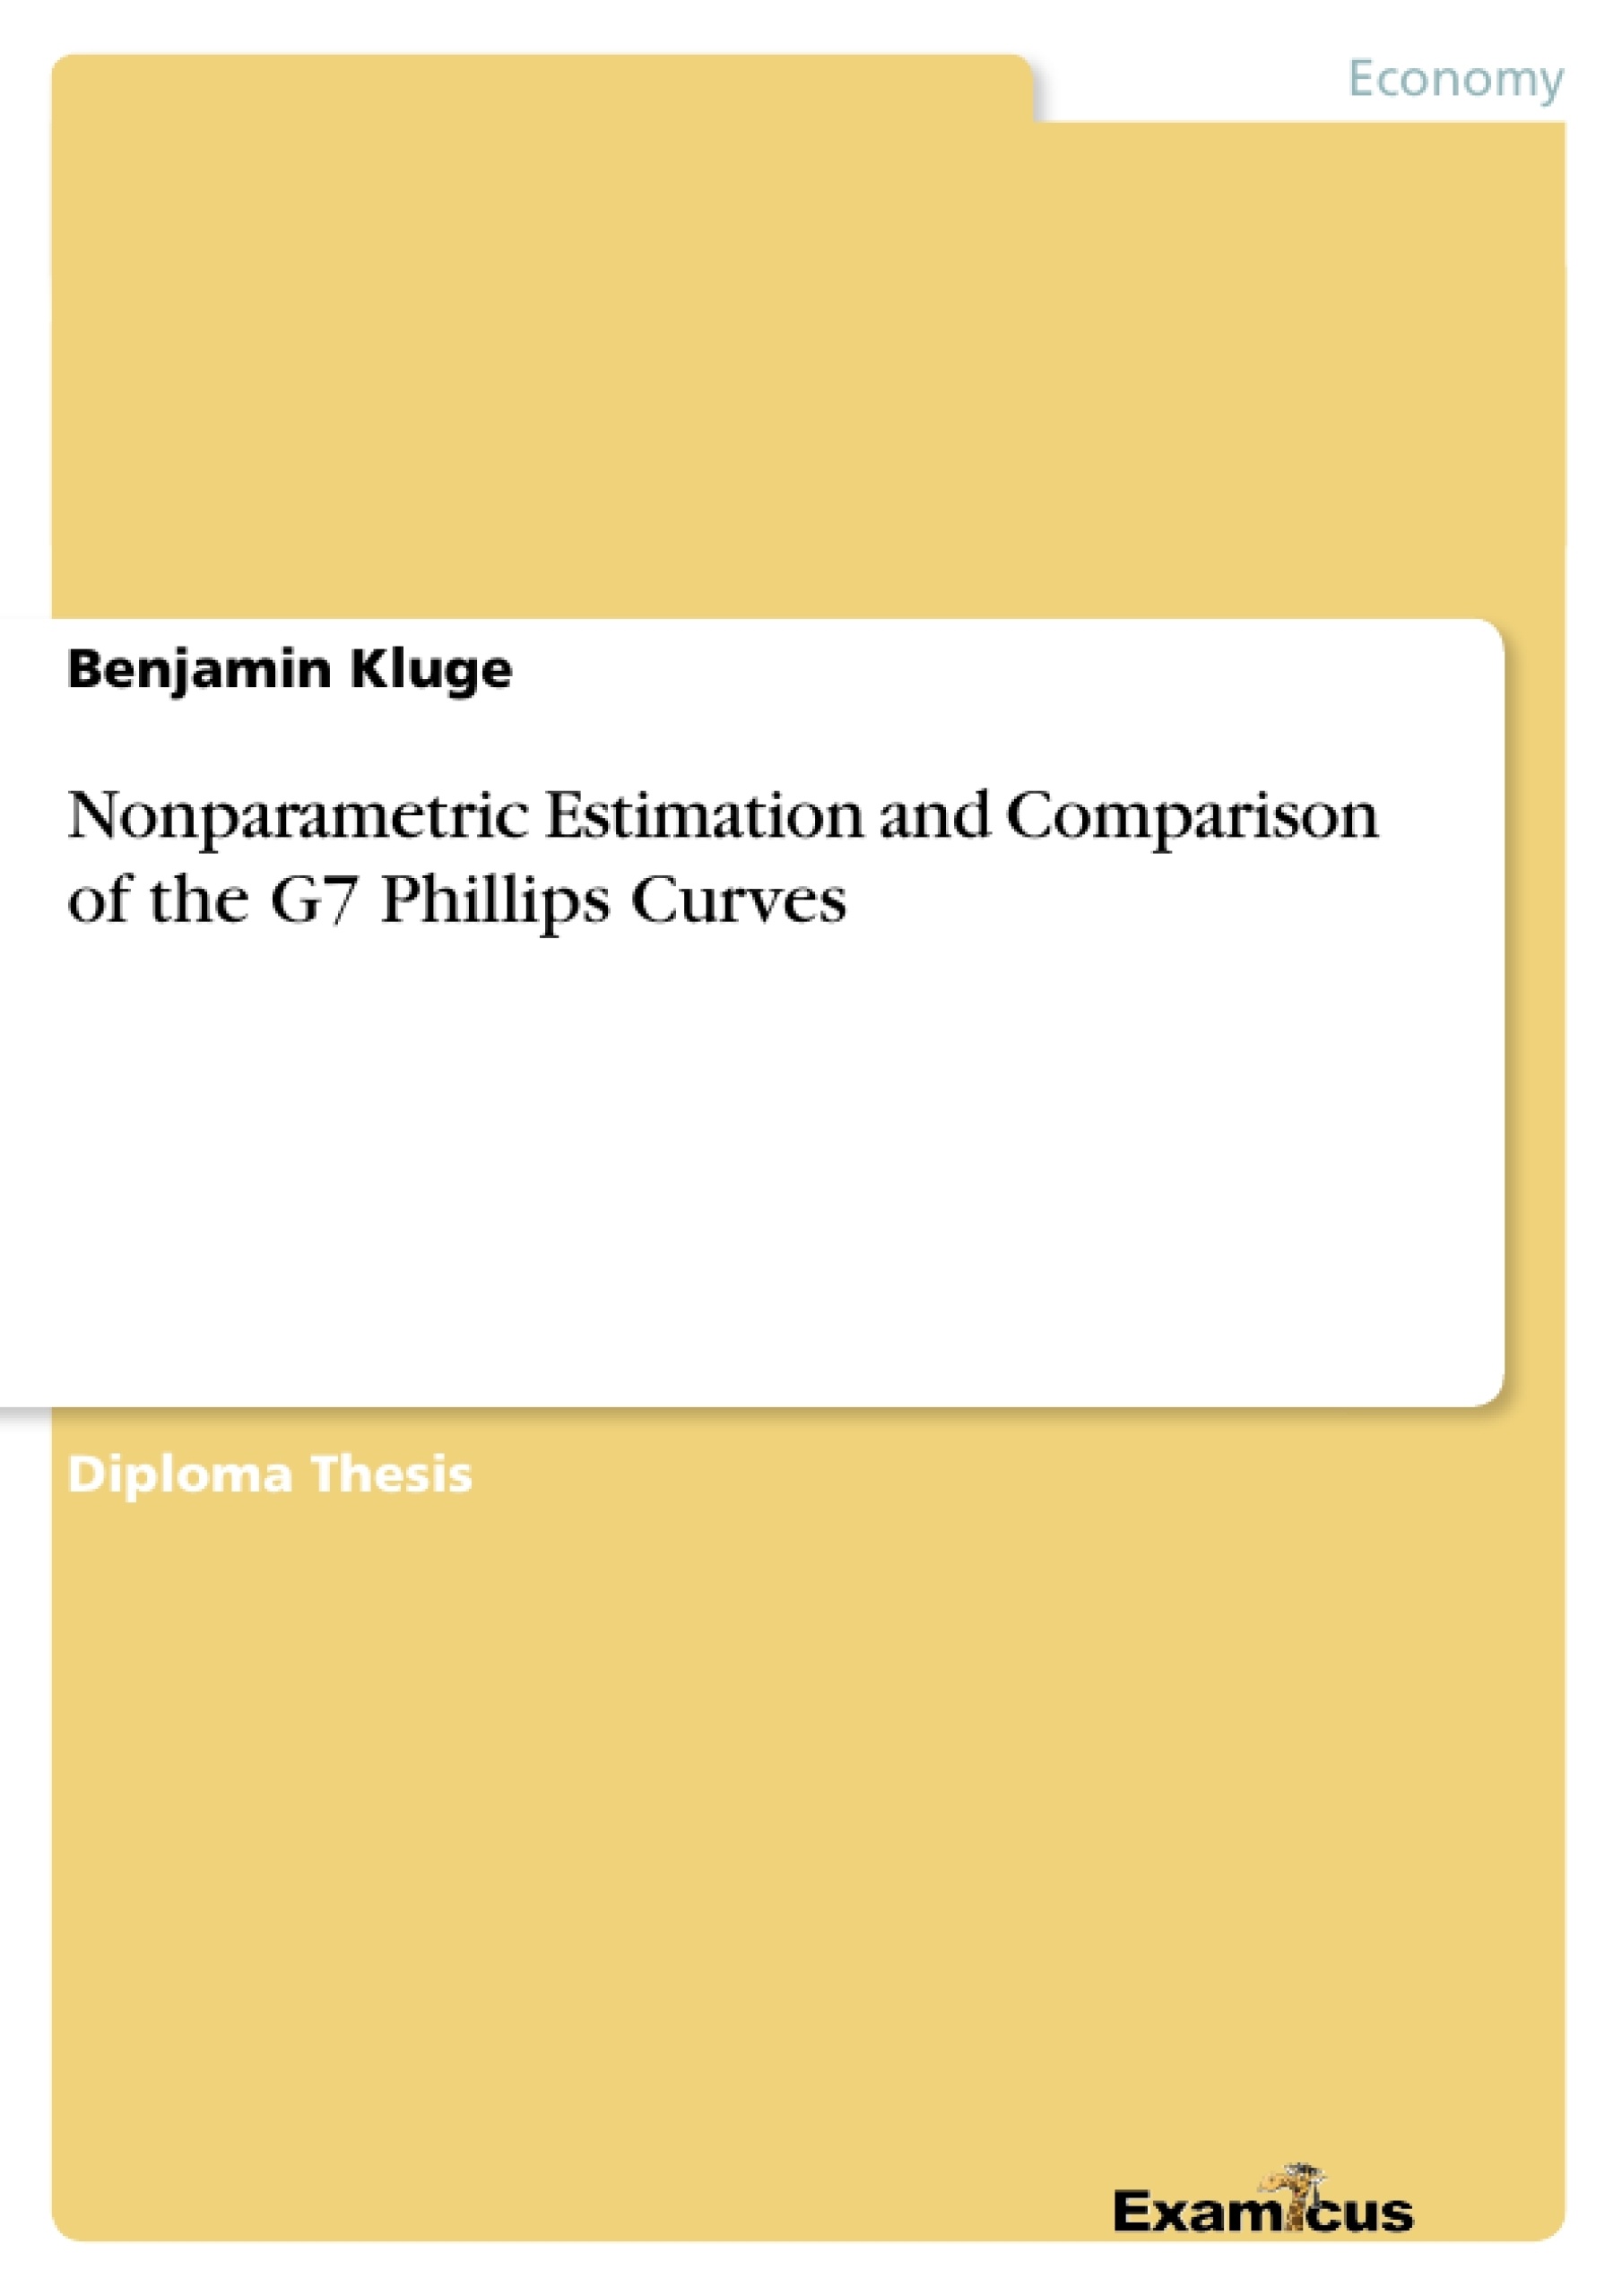 Title: Nonparametric Estimation and Comparison of the G7 Phillips Curves